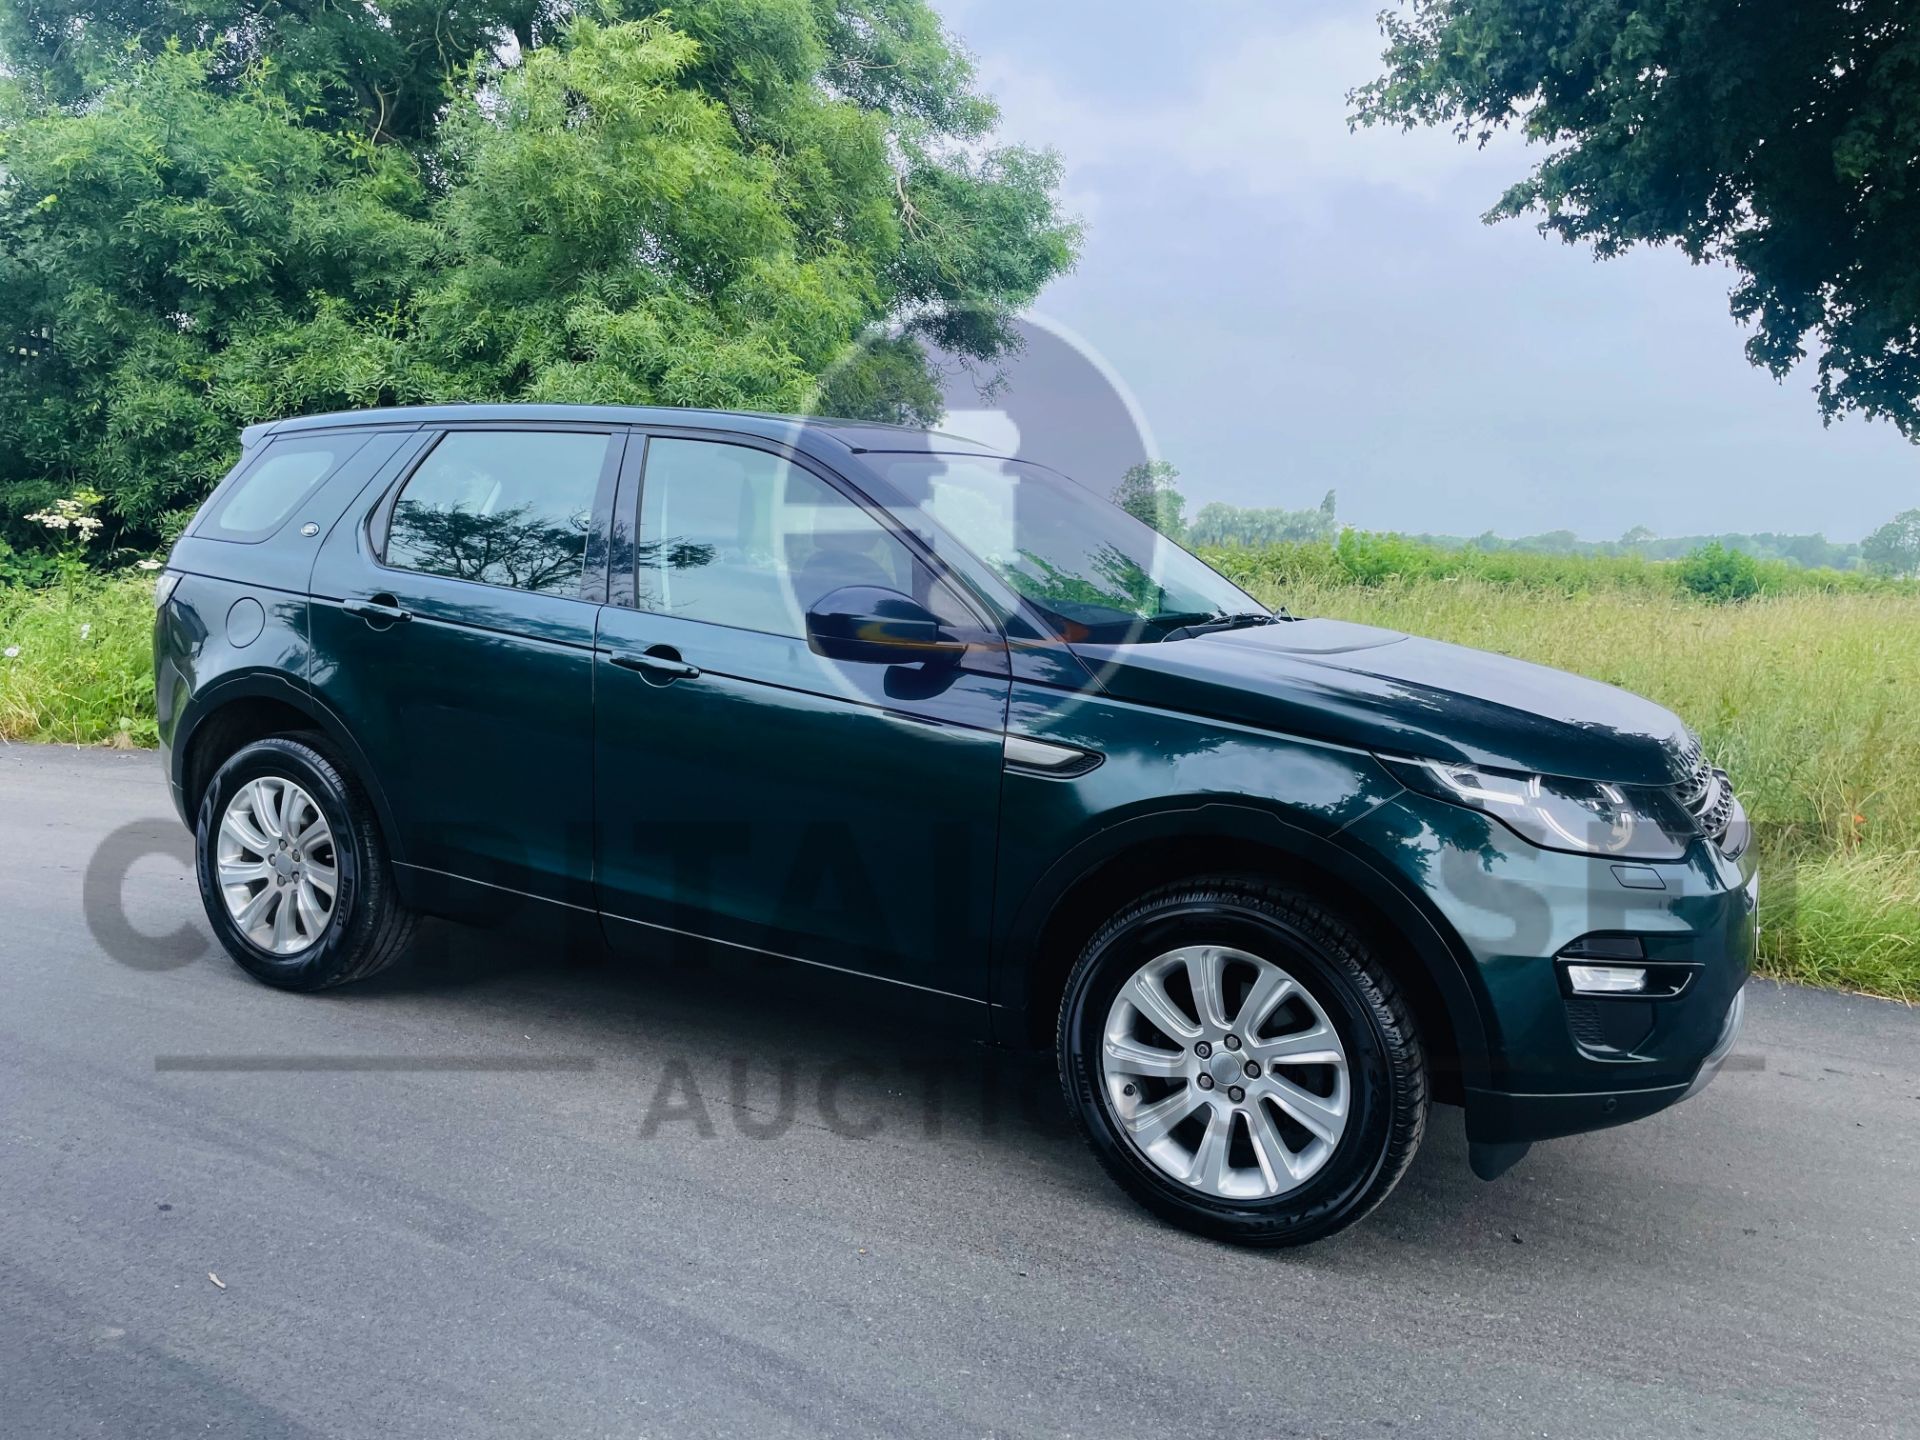 LAND ROVER DISCOVERY SPORT *SE TECH* 7 SEATER SUV (2016) 2.0 TD4 - AUTO *LEATHER & NAV* (NO VAT)